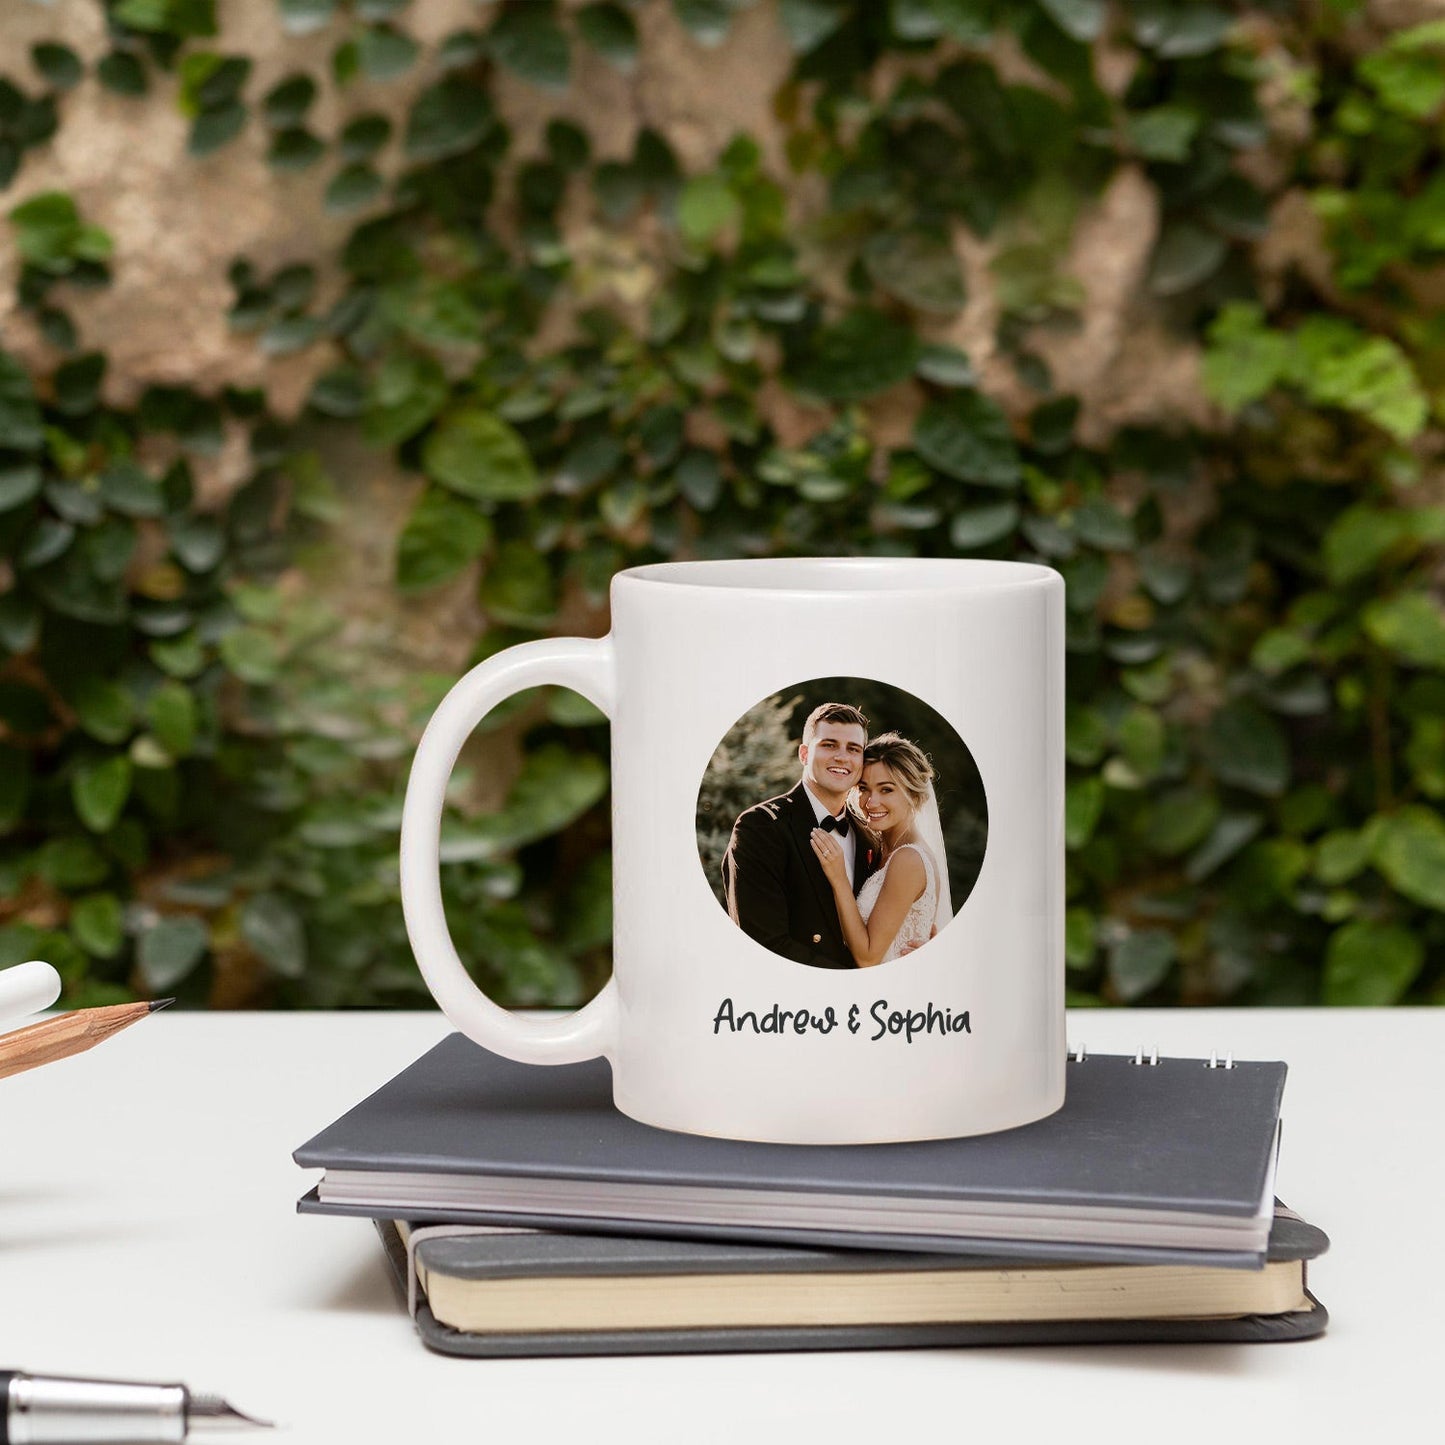 Endless Love, Happiness And Crazy Adventures Together - Personalized Wedding or Anniversary gift For Friends, Siblings, Children and Inlaws - Custom Mug - MyMindfulGifts